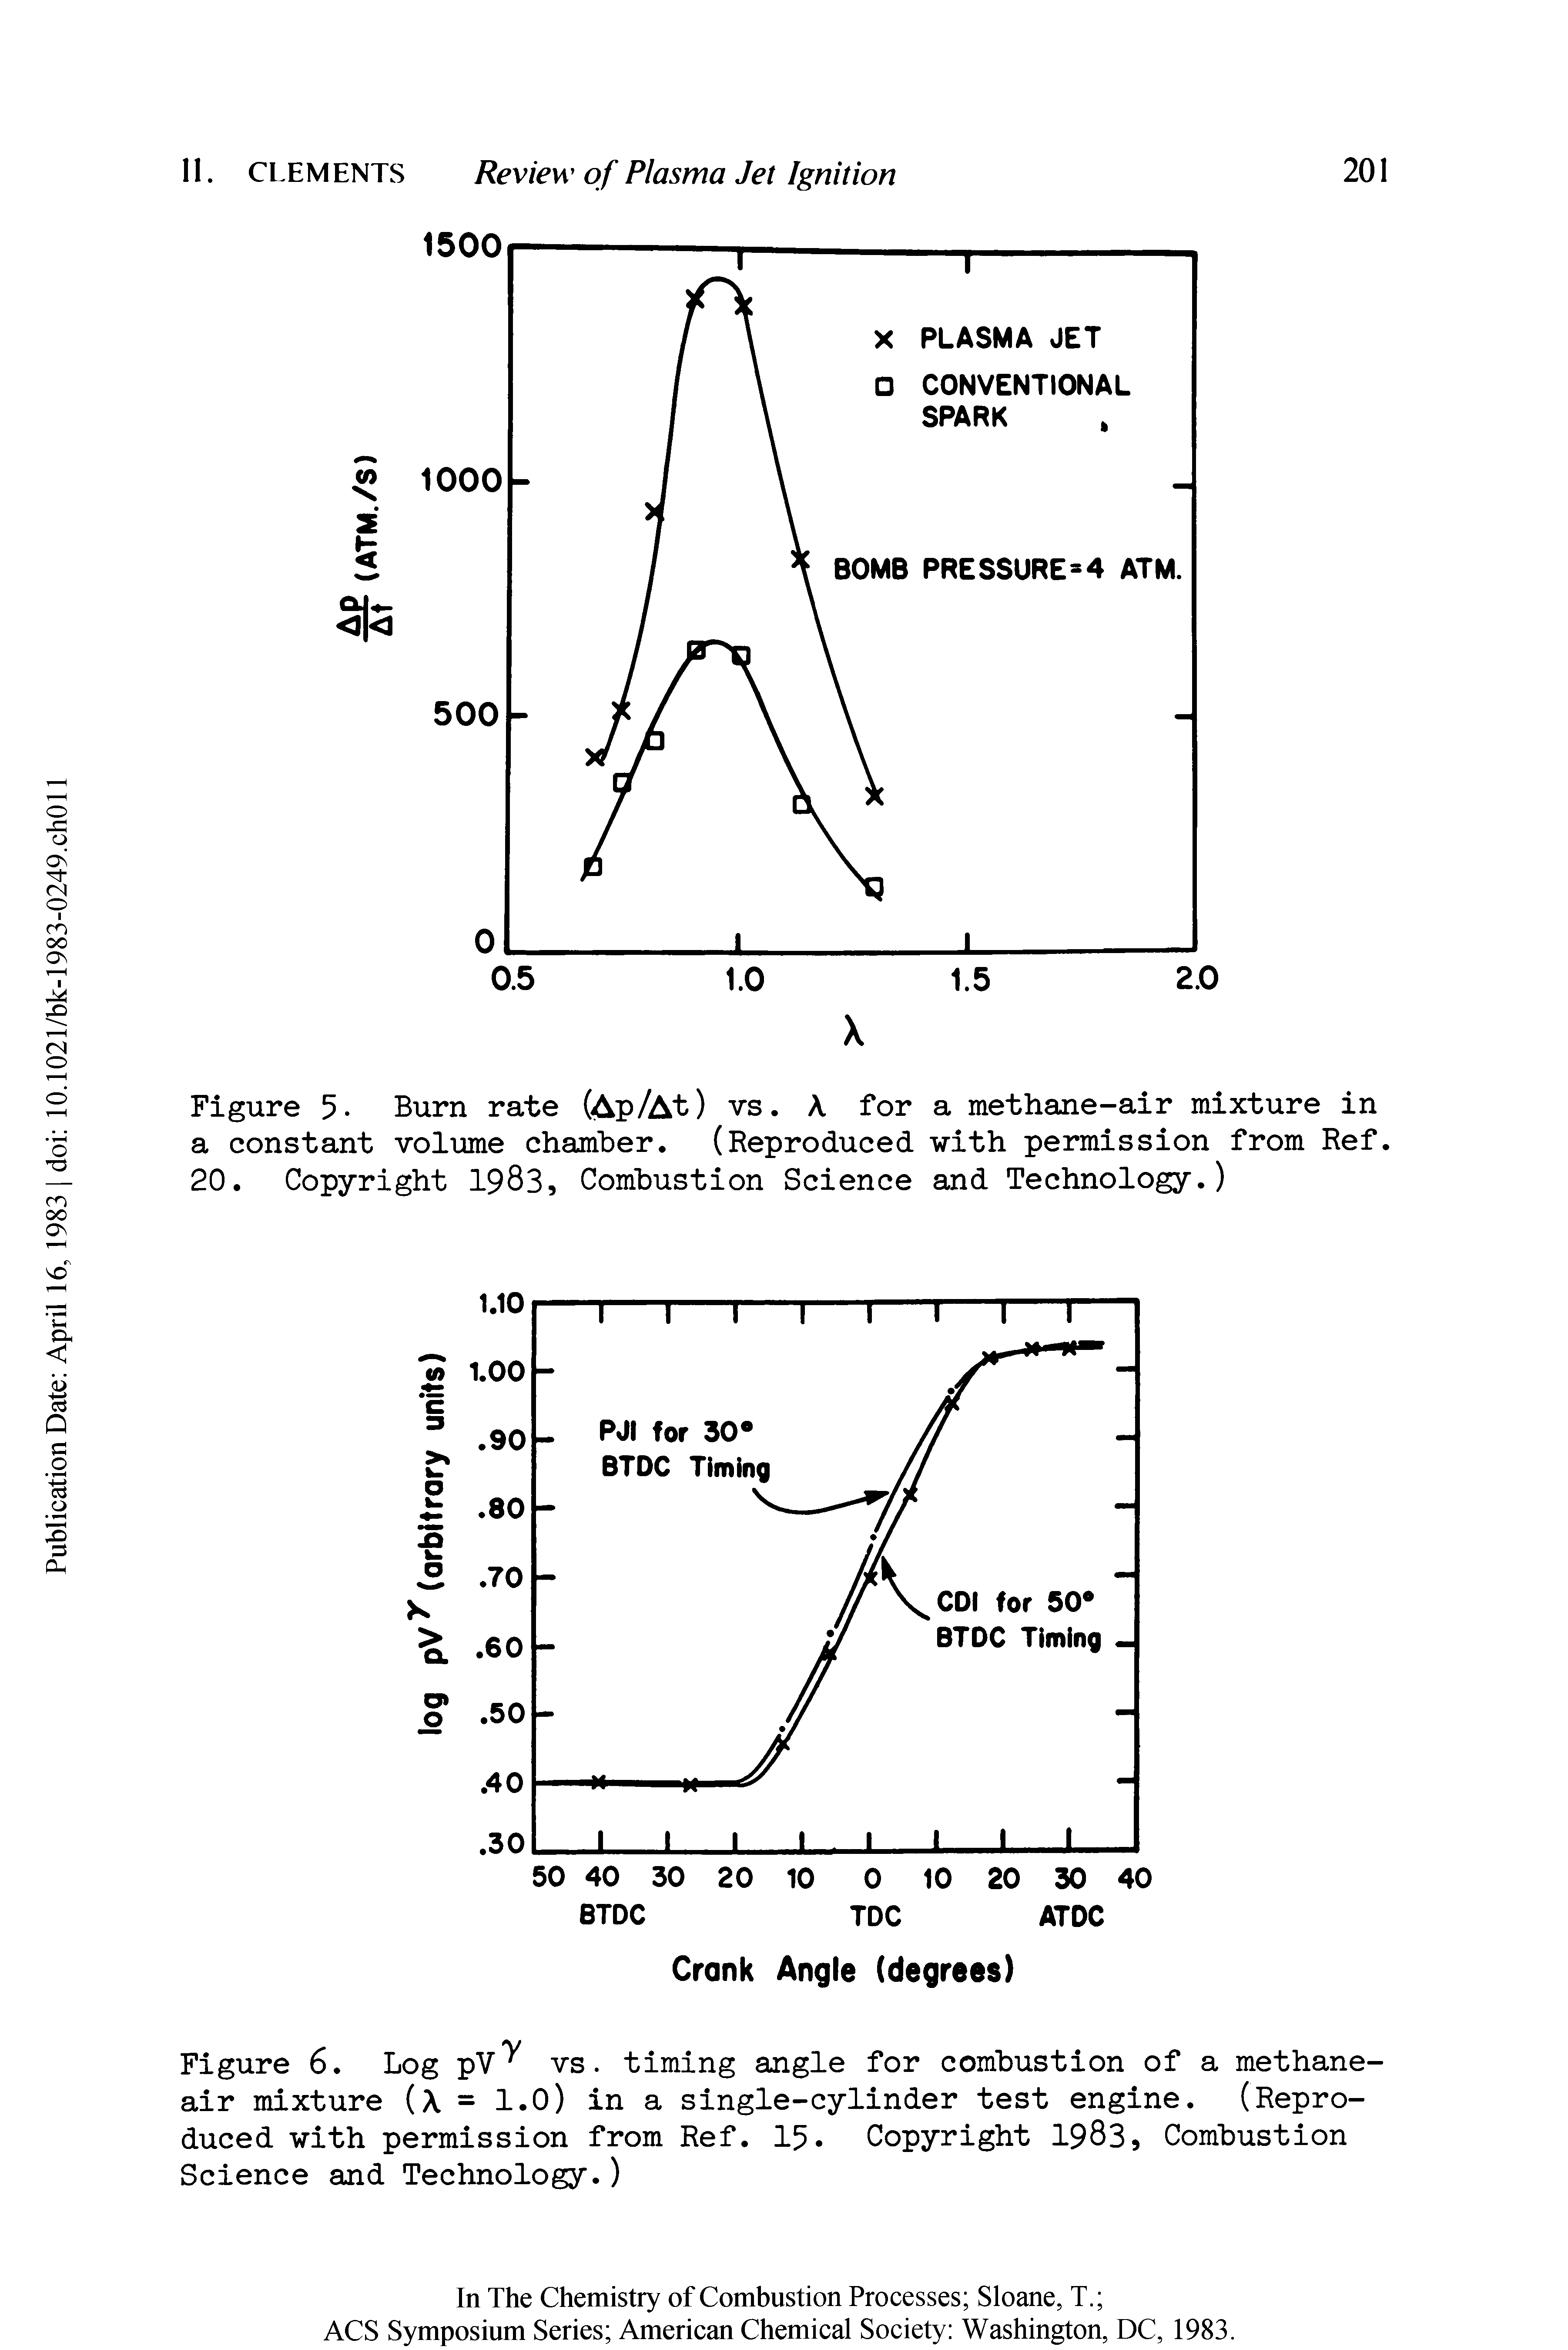 Figure 6. Log pV vs. timing angle for combustion of a methane-air mixture (X = l.O) in a single-cylinder test engine. (Reproduced with permission from Ref. 15. Copyright 1983, Combustion Science and Technology.)...